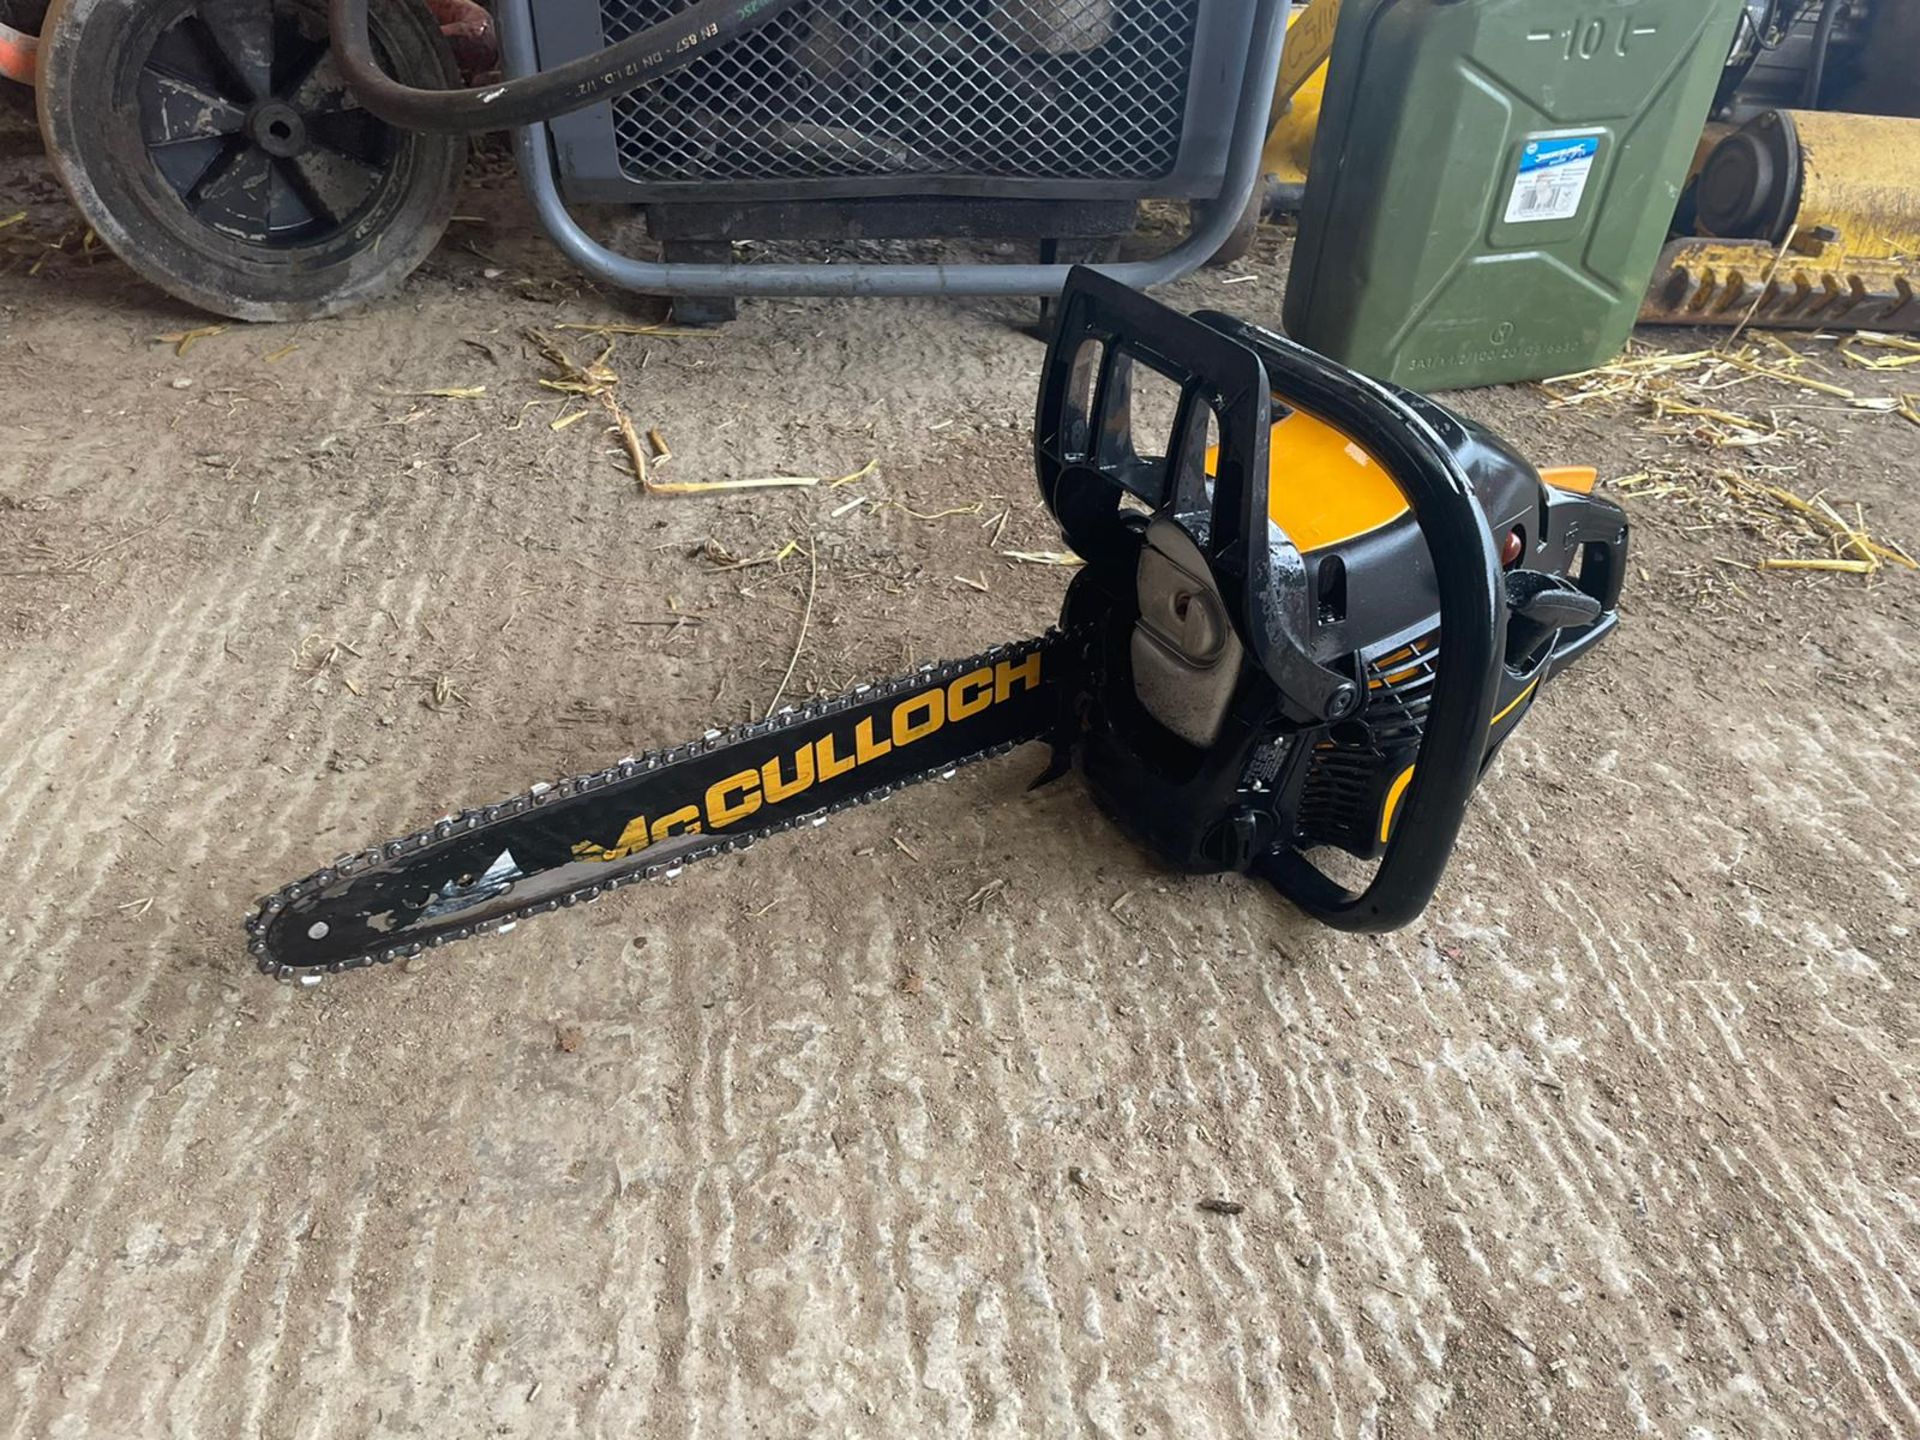 2018 McCULLOCH CS340 CHAINSAW, MADE BY HUSQVARNA, RUNS AND WORKS, 16" BAR AND CHAIN *NO VAT* - Image 2 of 5